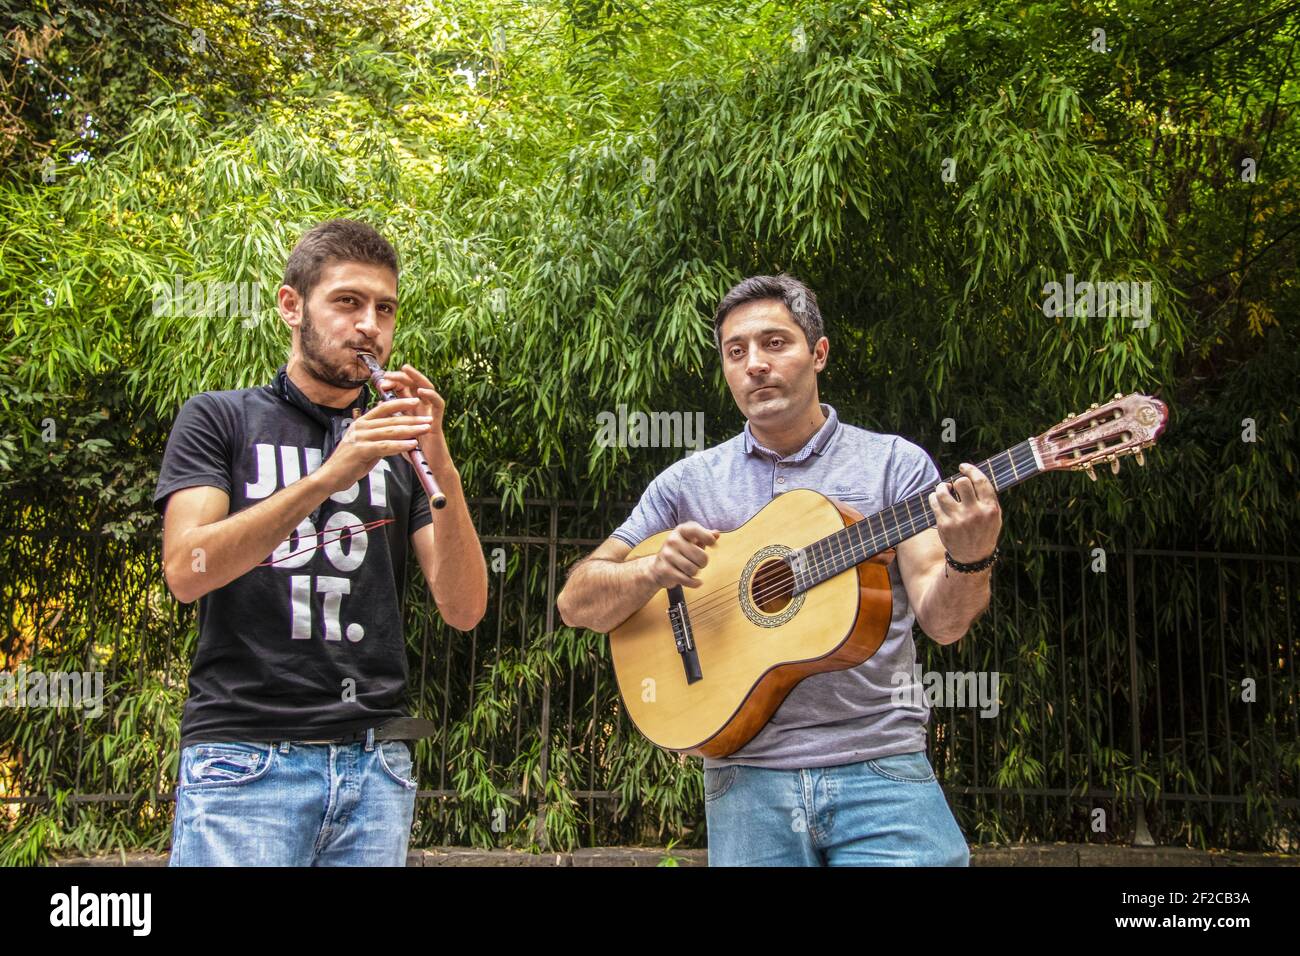 7-19-2019 Tbilisi Georgia Two young men in jeans playing traditional Georgian music outside with guitar and stviri or flute Stock Photo